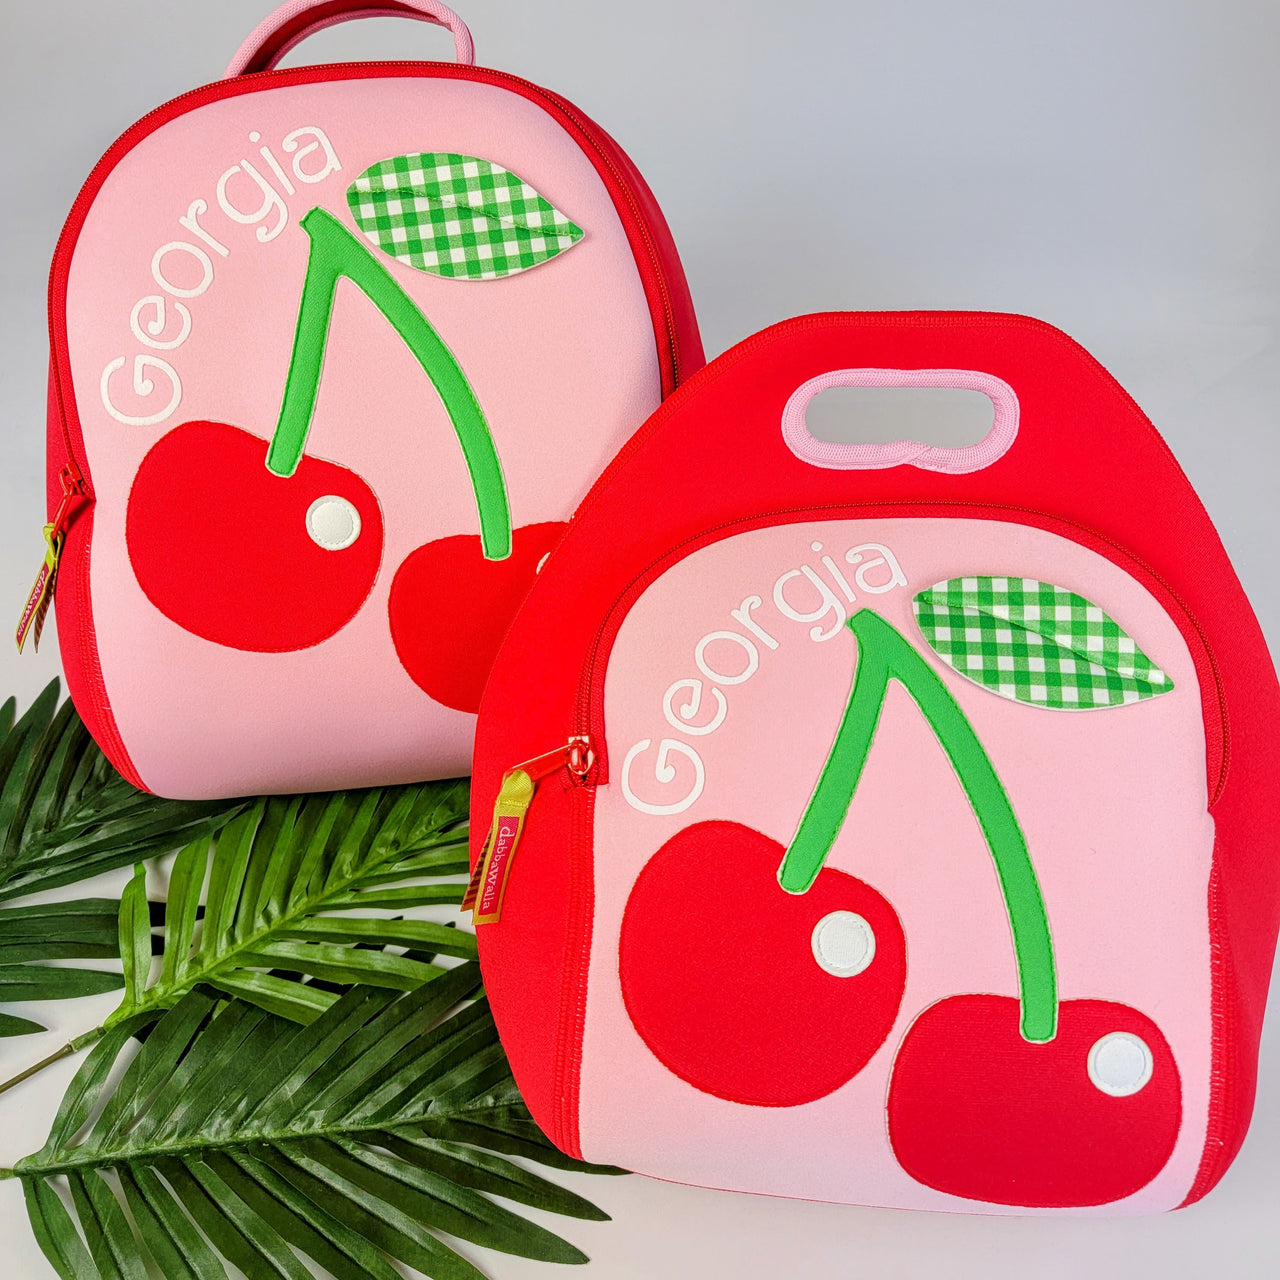 Cherries Backpack and Lunch Box Set